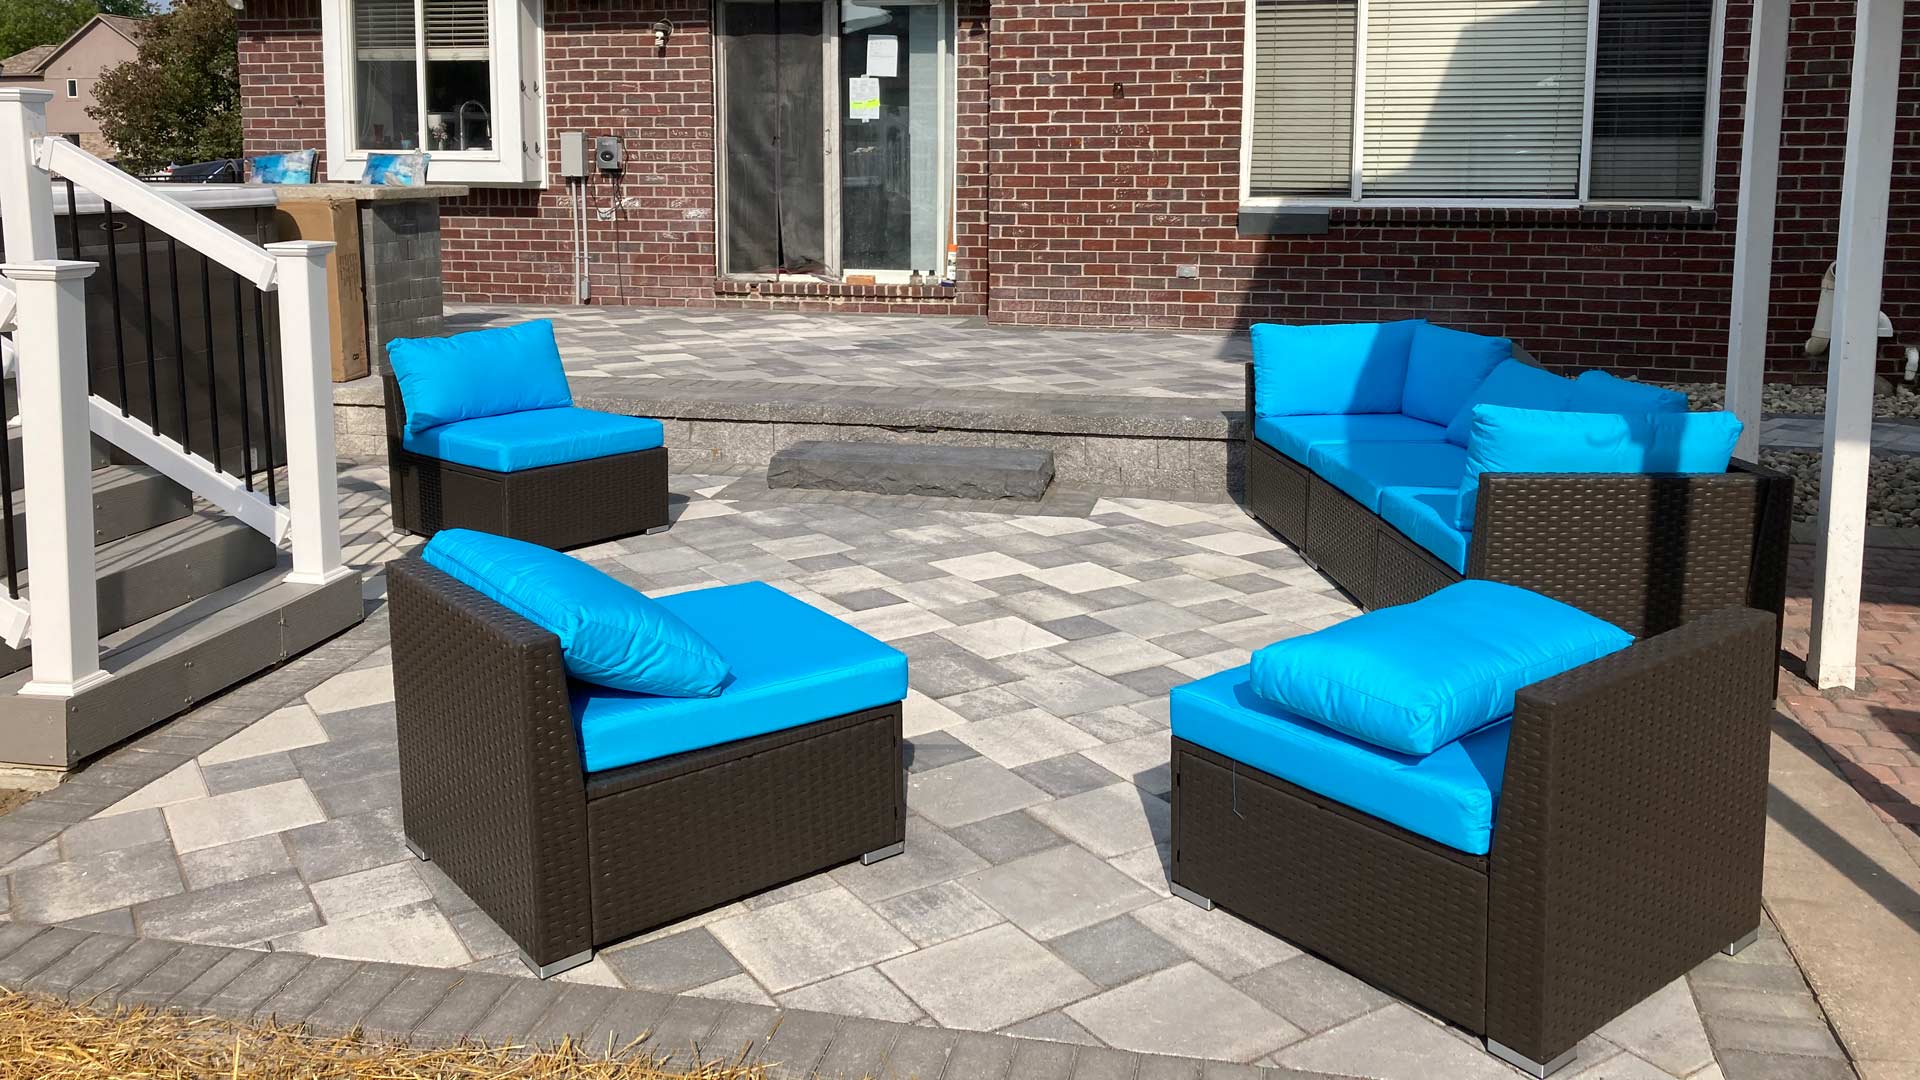 Patio installed with furniture placed in Macomb, MI.